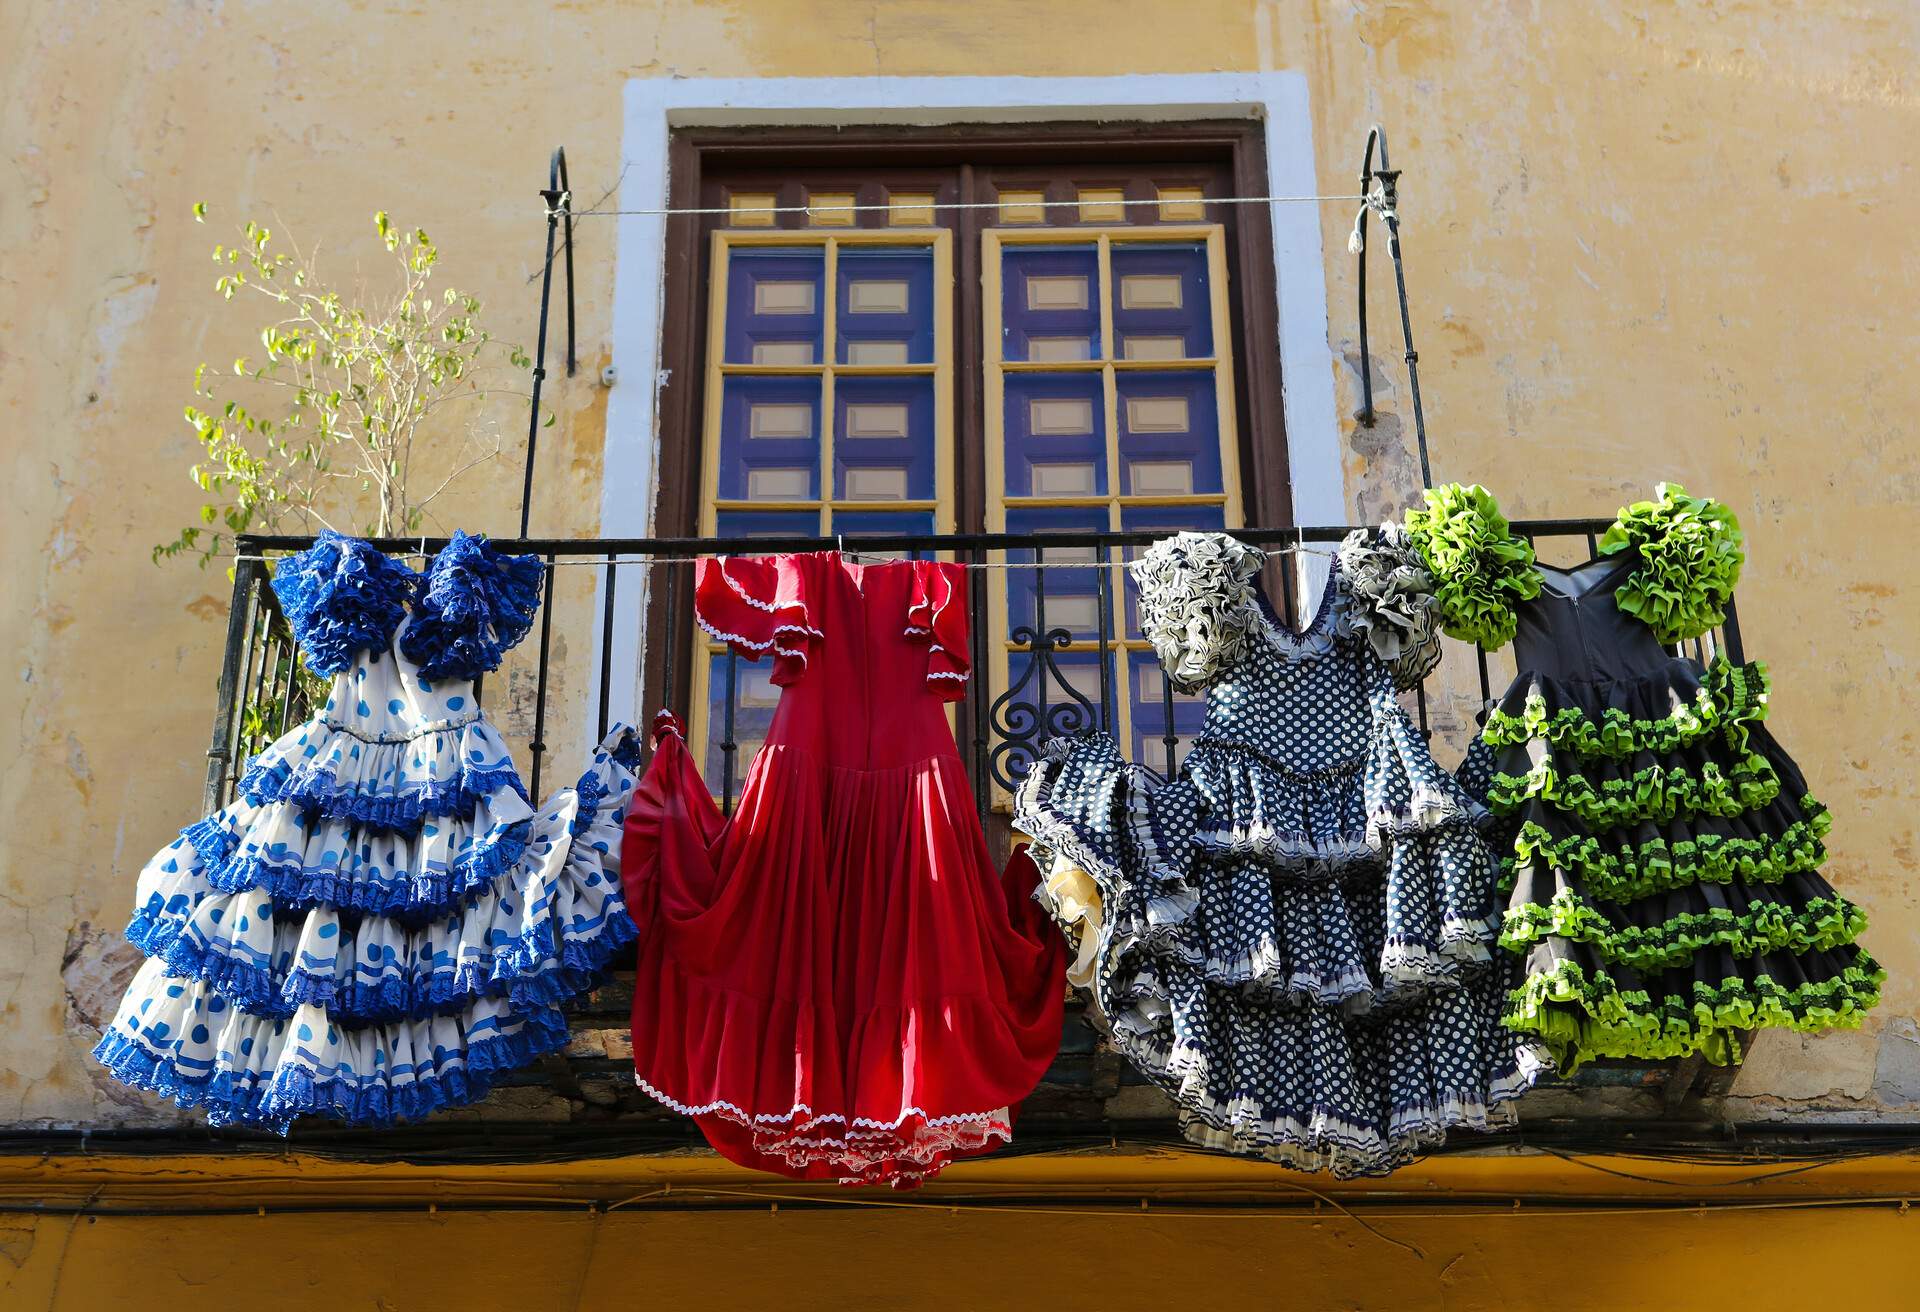 DEST_SPAIN_Malaga_Andalusia_Flamenco_GettyImages-468805314.jpg